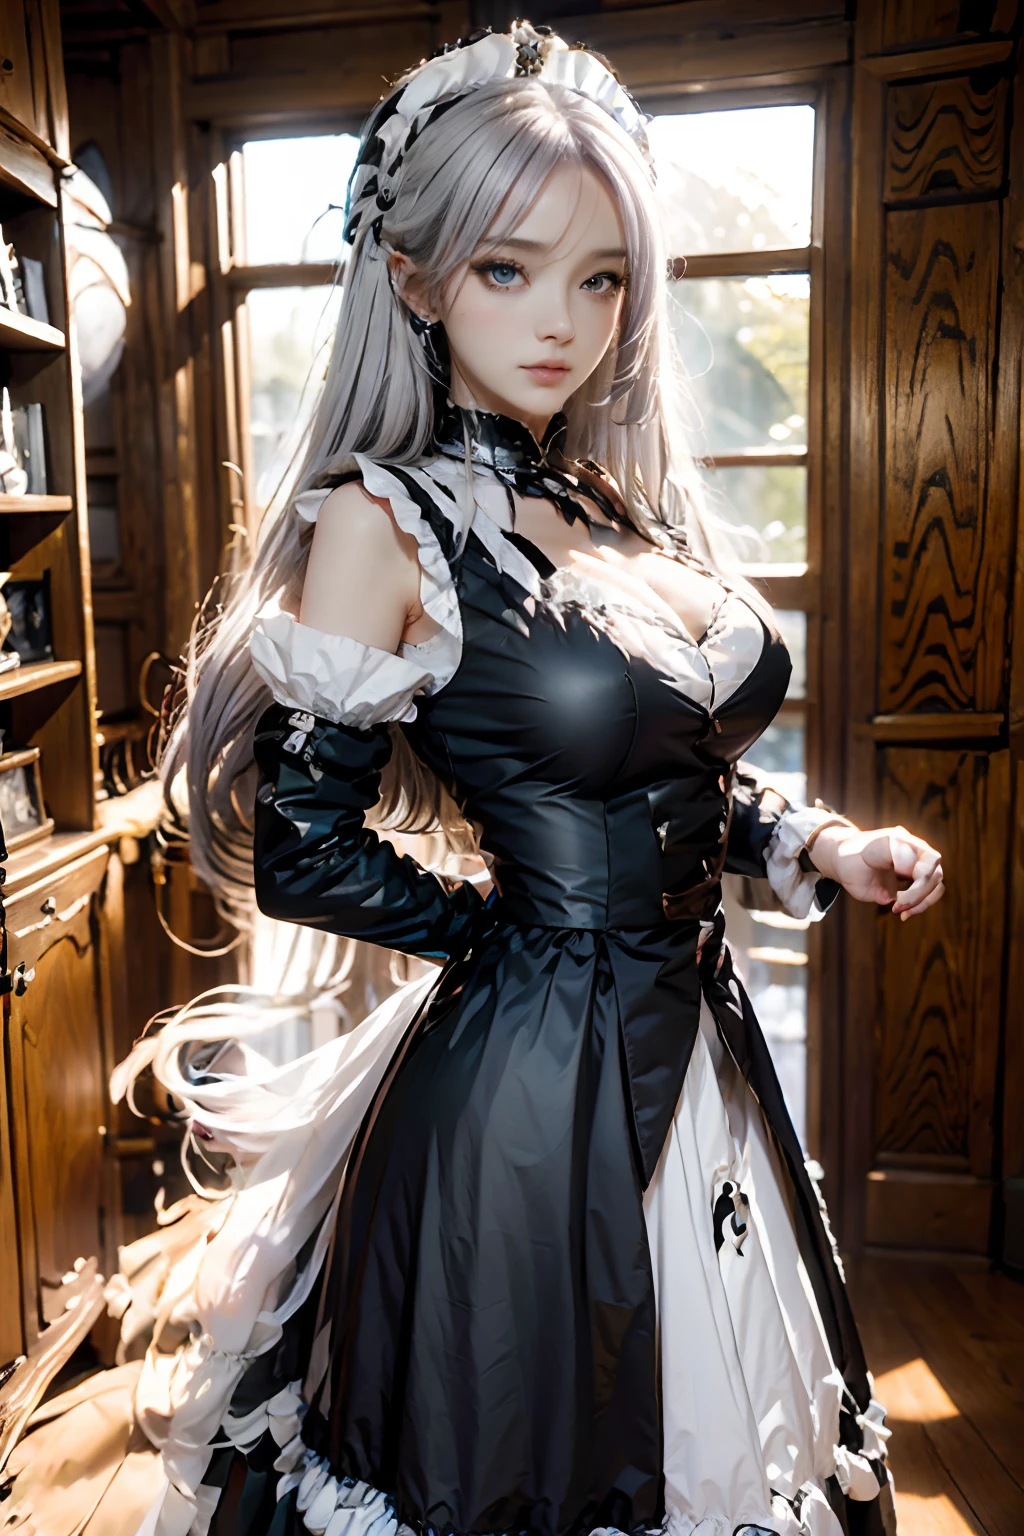 The woman, (European Citizenship: 1.2) In a black and white outfit posing for a photo, maiden! Dress, Anime Girl Cosplay, anime girl in a maid costume, The Magnificent Maiden, maid outfit, cosplay photo, cosplay, anime cosplay, A Few Cute Poses, Заманчивый портрет Marvel's Storm (snow-white hair!), (Face of the Goddess), (Elegant posture: 1.4), Elegant atmosphere, Noble atmosphere, (Milf: 1.6) (Shiny bright white hair: 1.5), (Cyan eyes: 1.4), (maidservant: 1.4), (Black and White Maid Outfit: 1.1), (Incredible beauty, High facial detail:1.3),